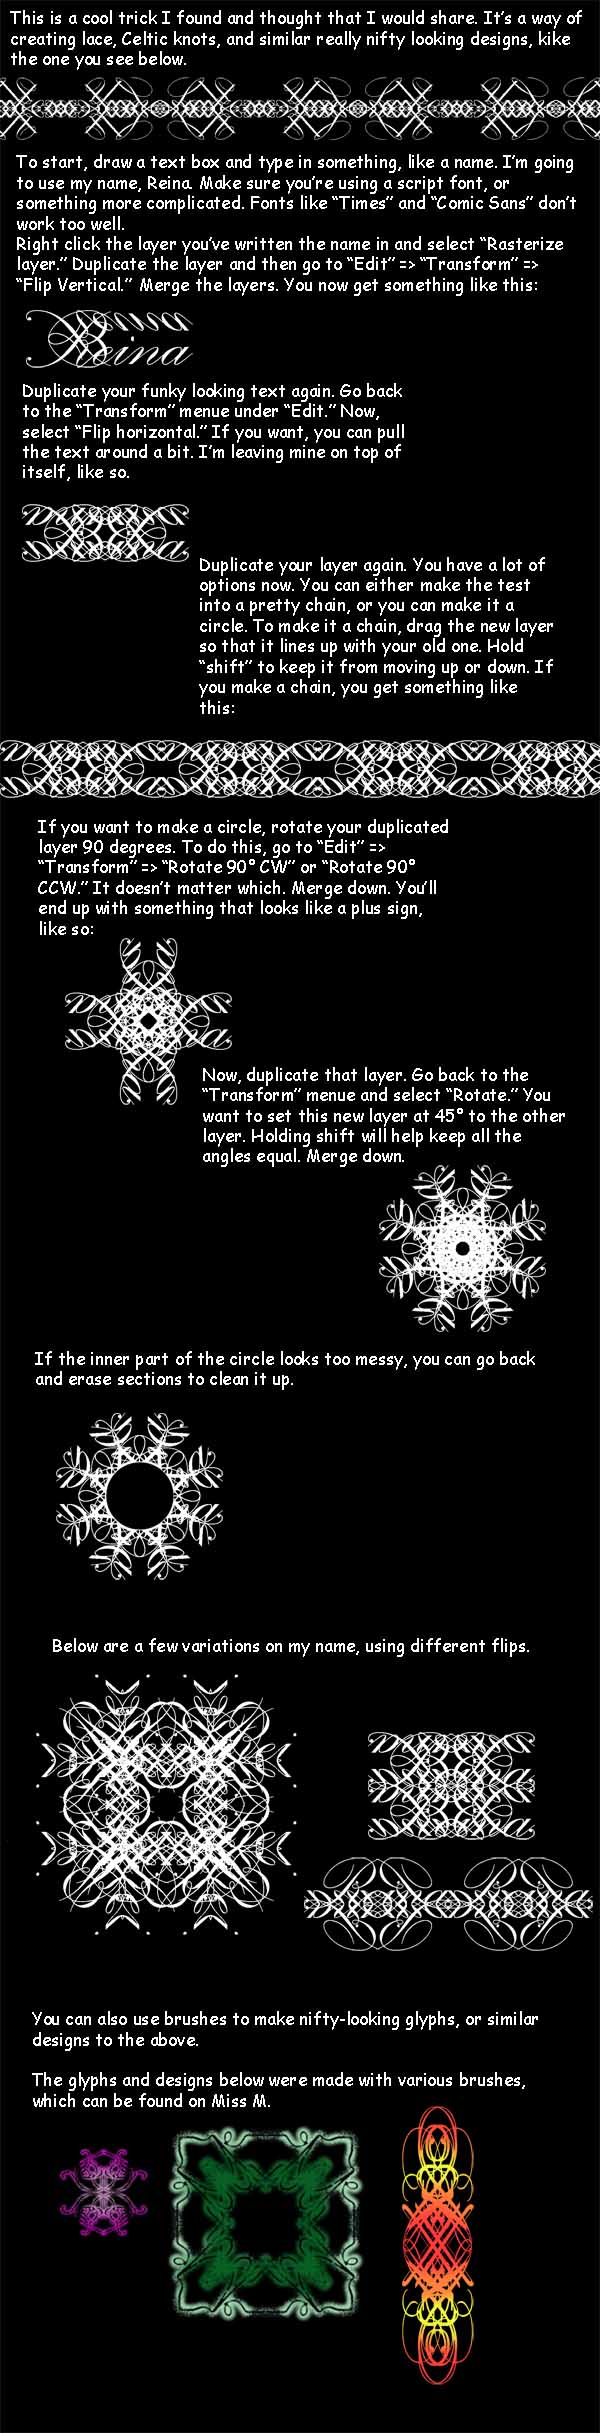 Lace and Celtic Knots Tutorial by Shinigami-no-Kaze